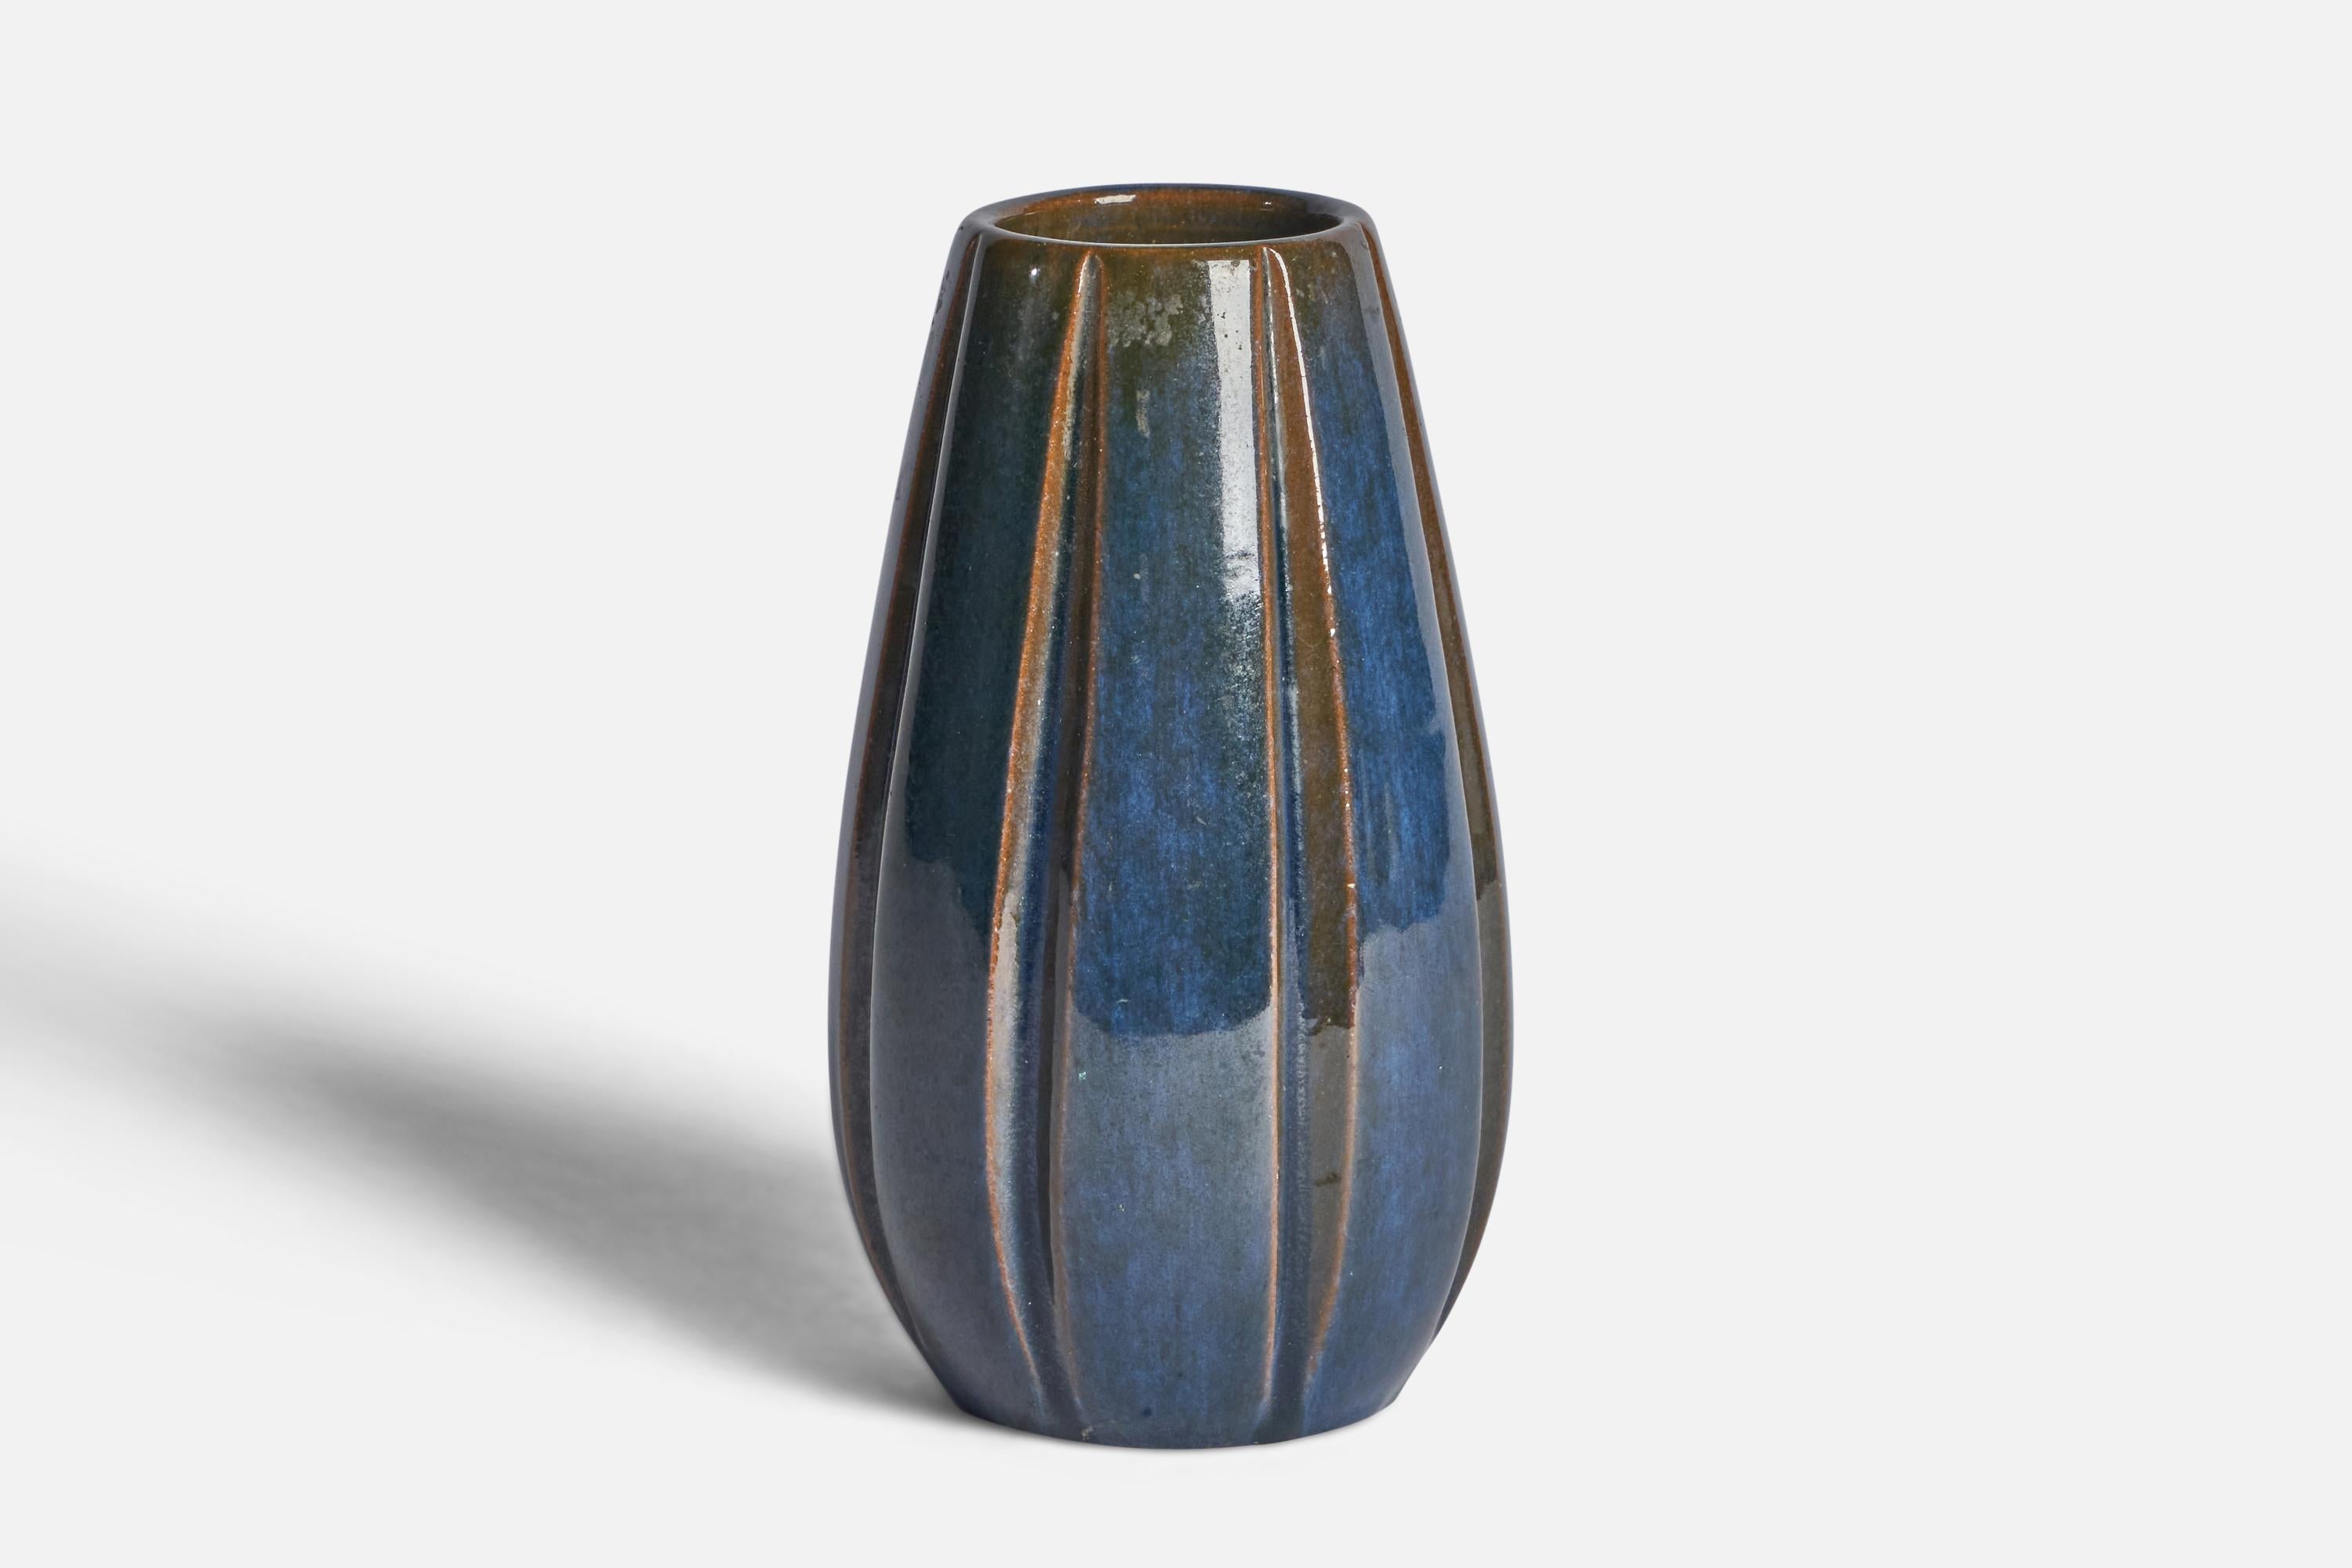 A blue and brown-glazed earthenware vase designed by Vicke Lindstrand and produced by Upsala Ekeby, Sweden, 1930s.